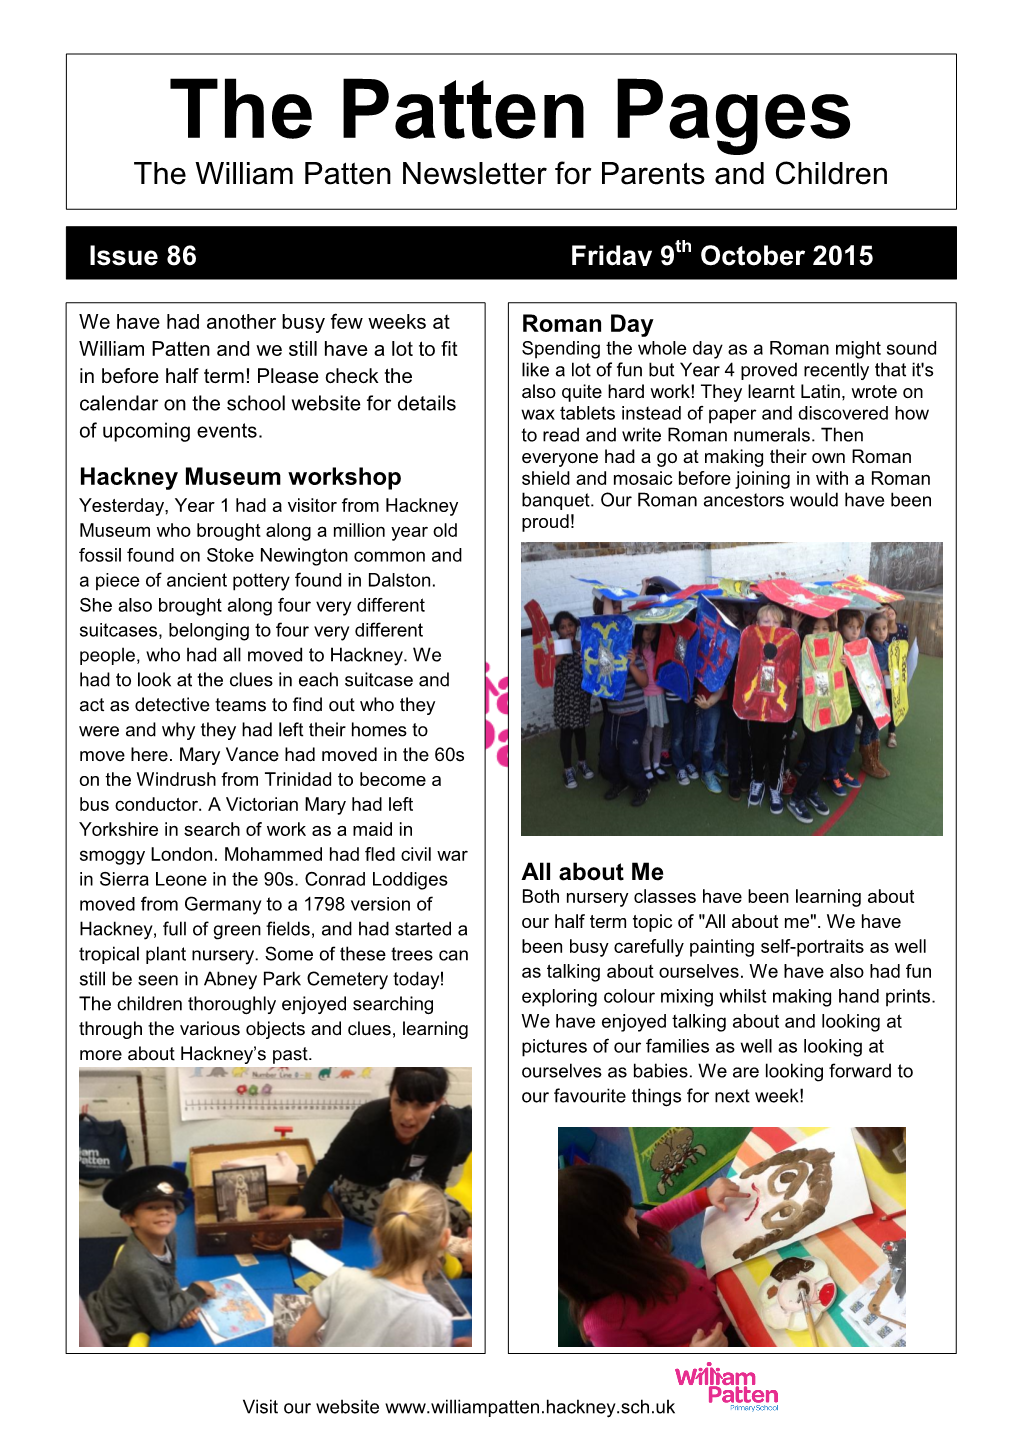 The Patten Pages the William Patten Newsletter for Parents and Children